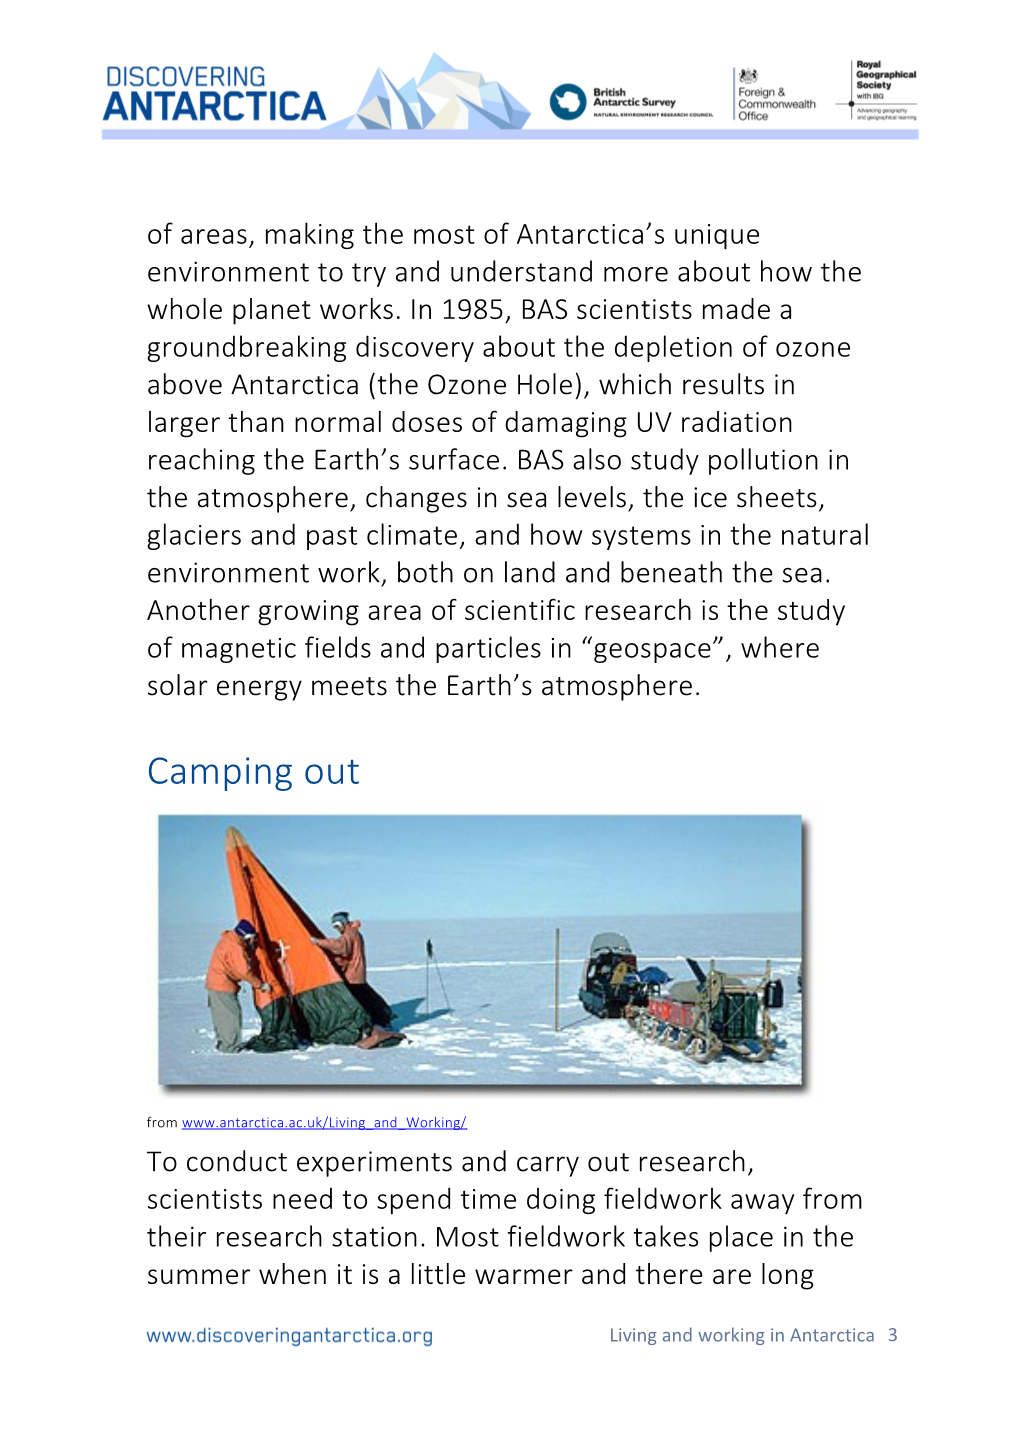 Living and Working in Antarctica